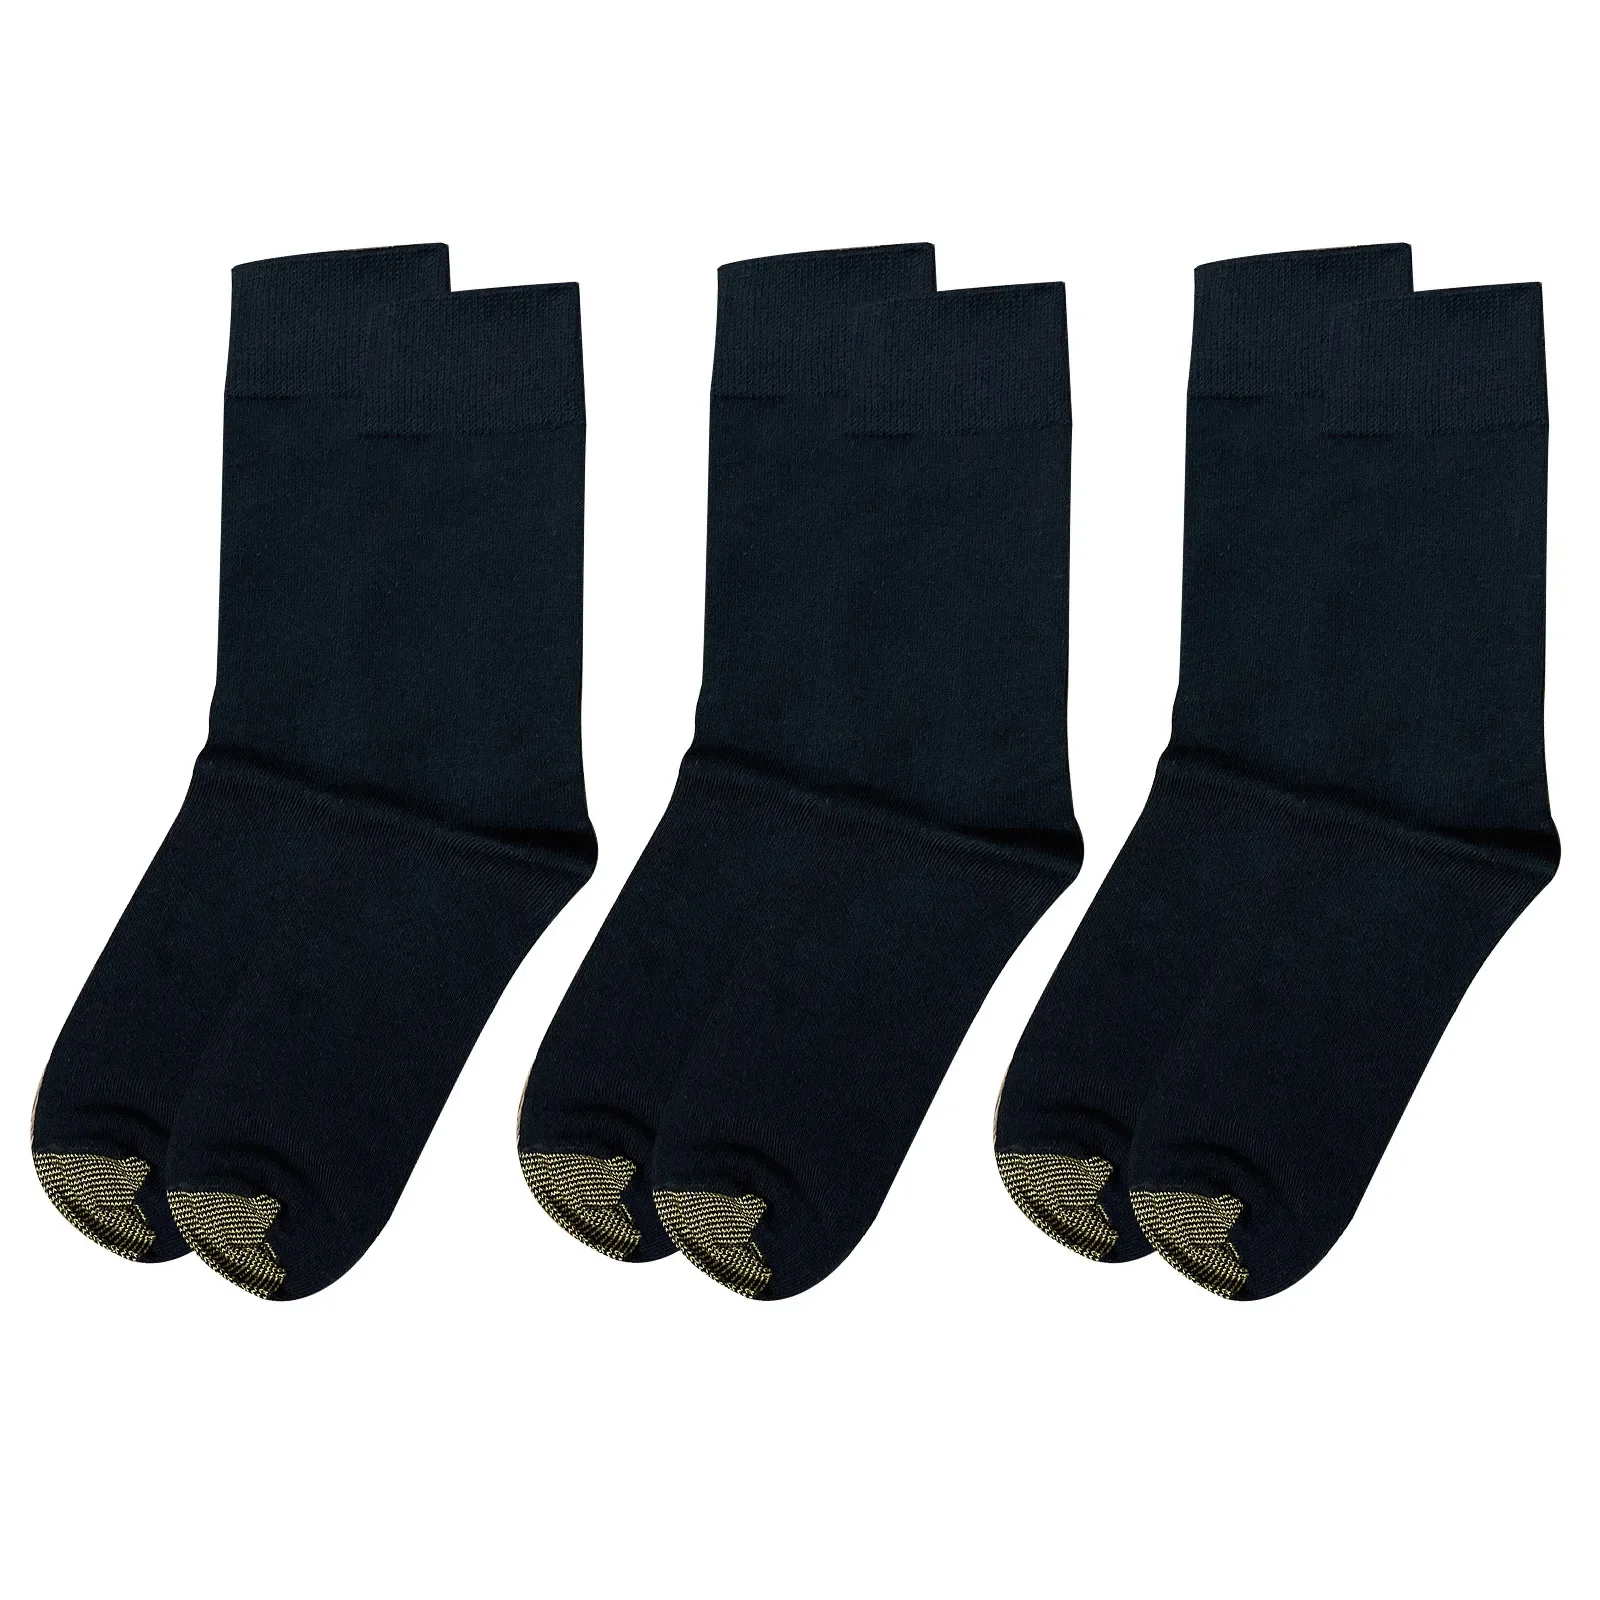 CLEVER-MENMODE 3 x Cotton Socks Men Formal Tube Sock Business Male hombre Sports Casual Soft Fashion Comfortable clever зодиаки лев